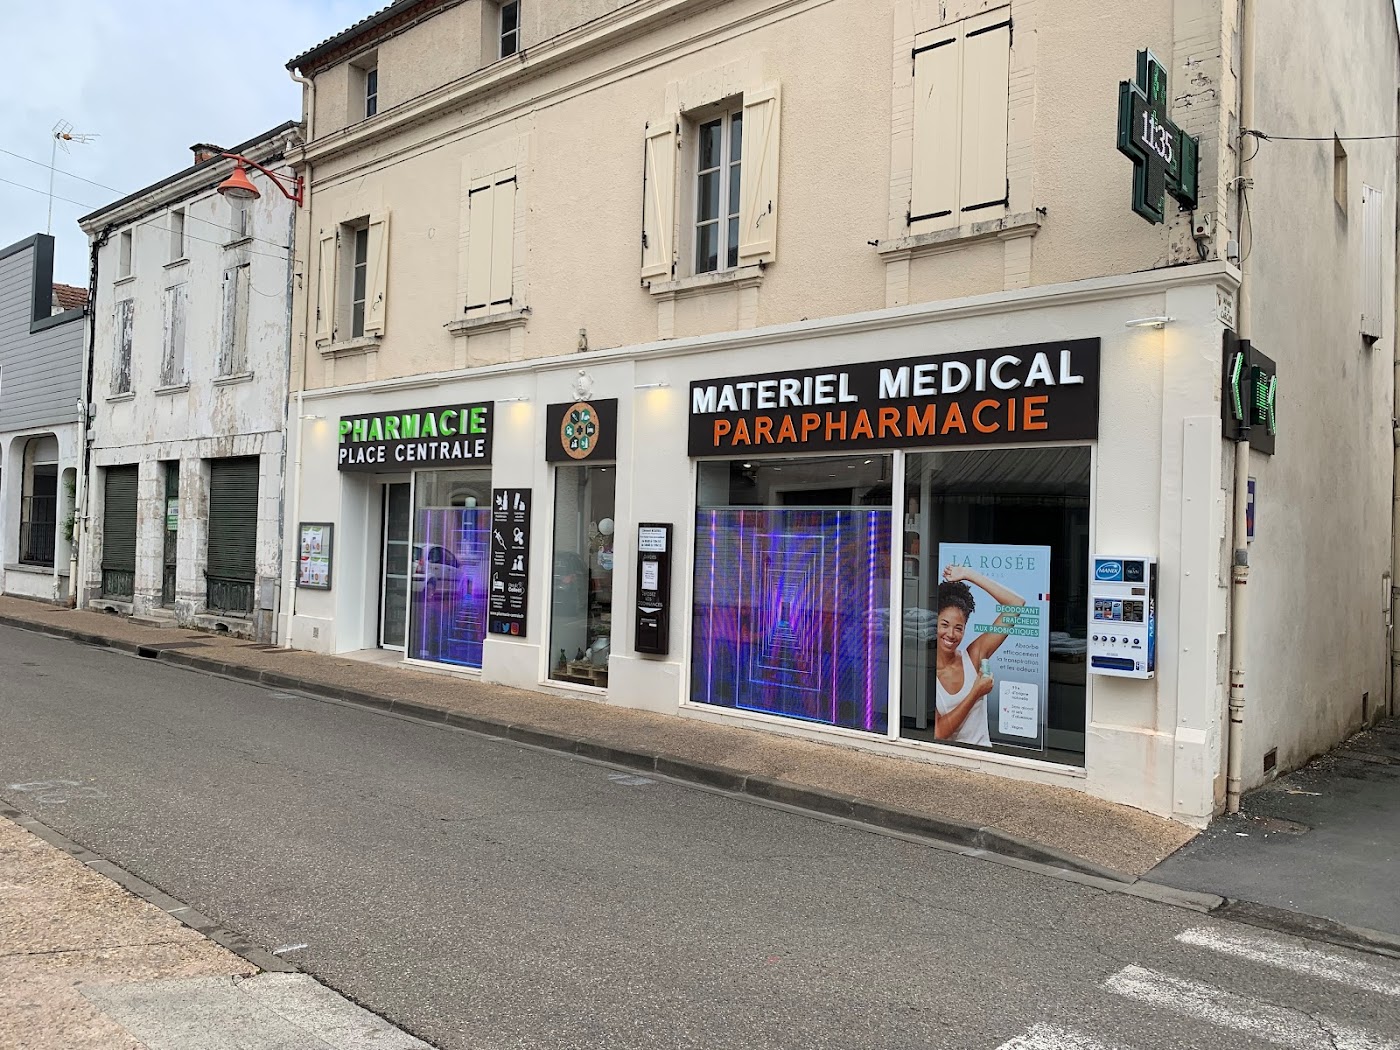 Pharmacie Place Centrale